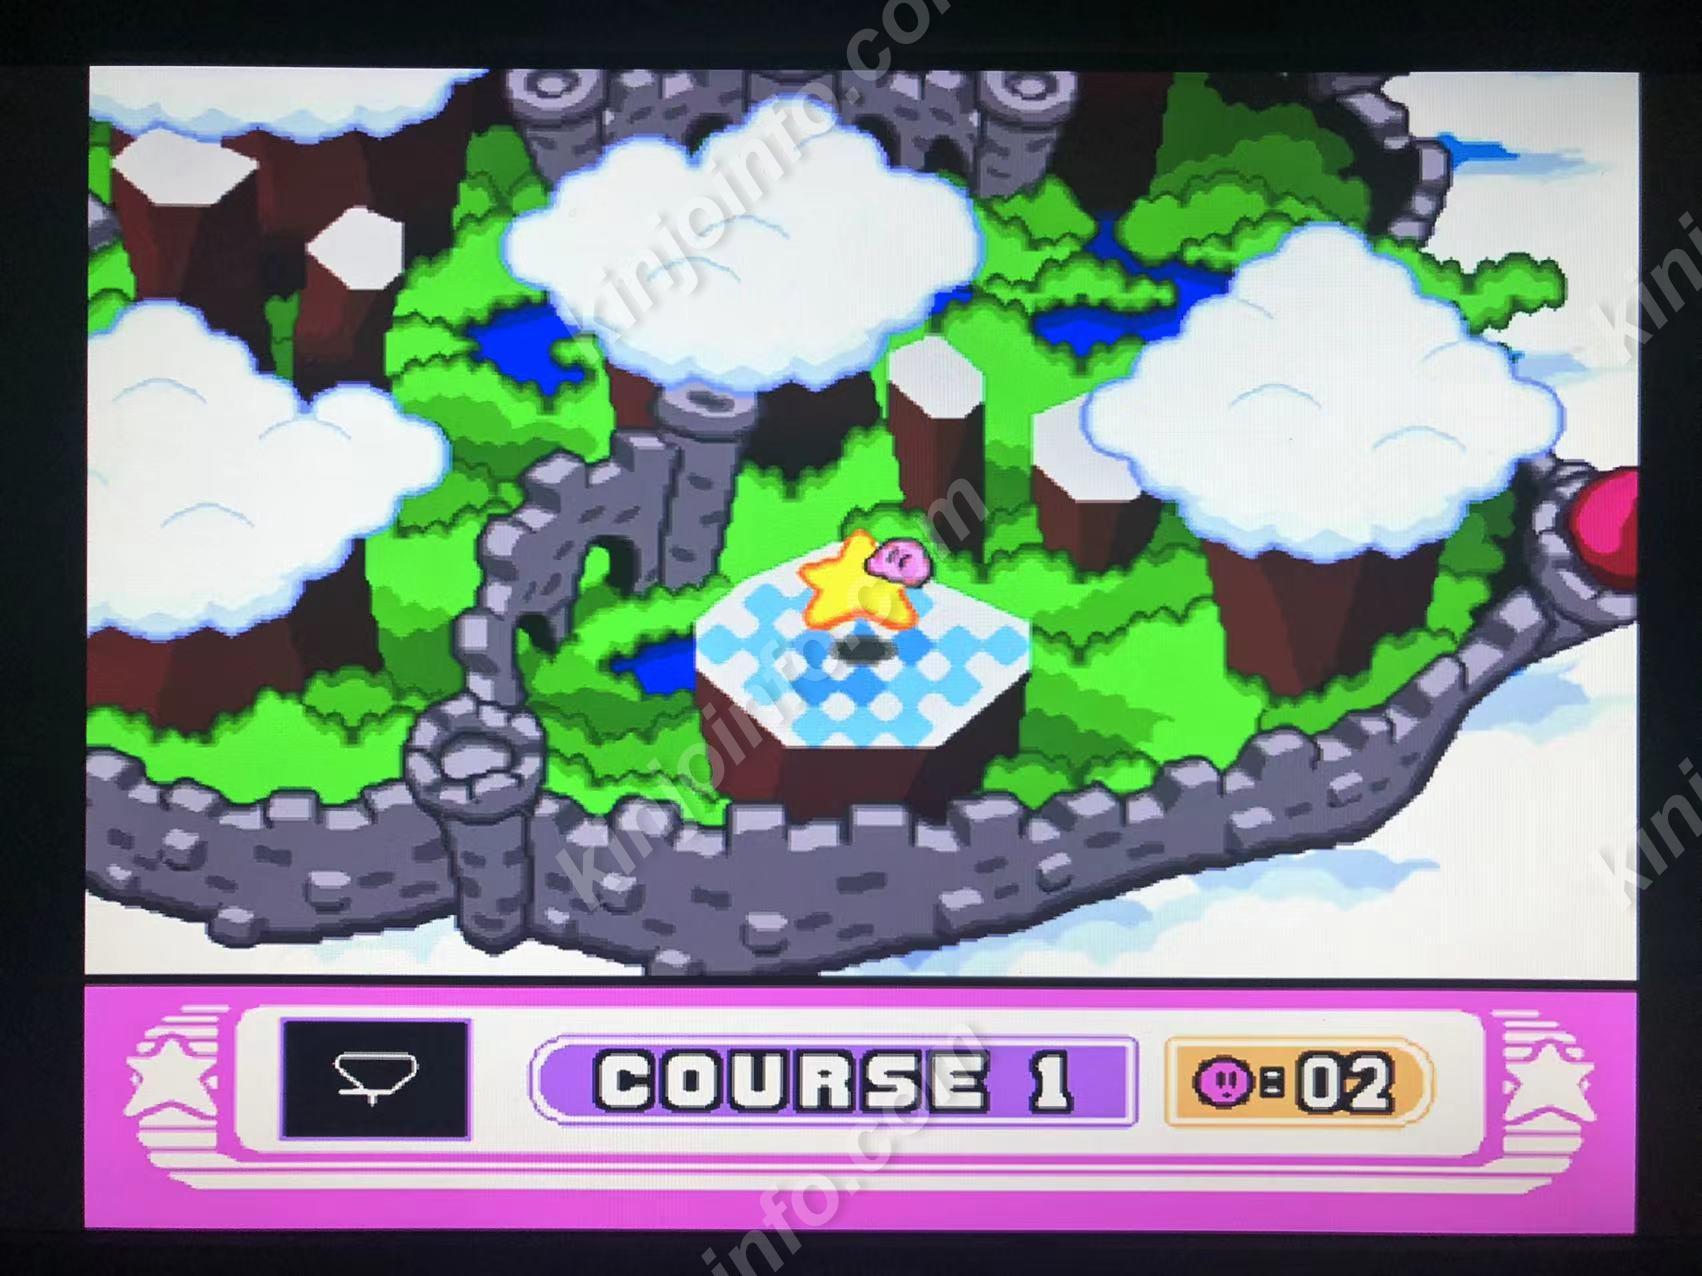 Kirby's Dream Course（カービィボウル）【中古・SNES北米版】 / kinjoinfo